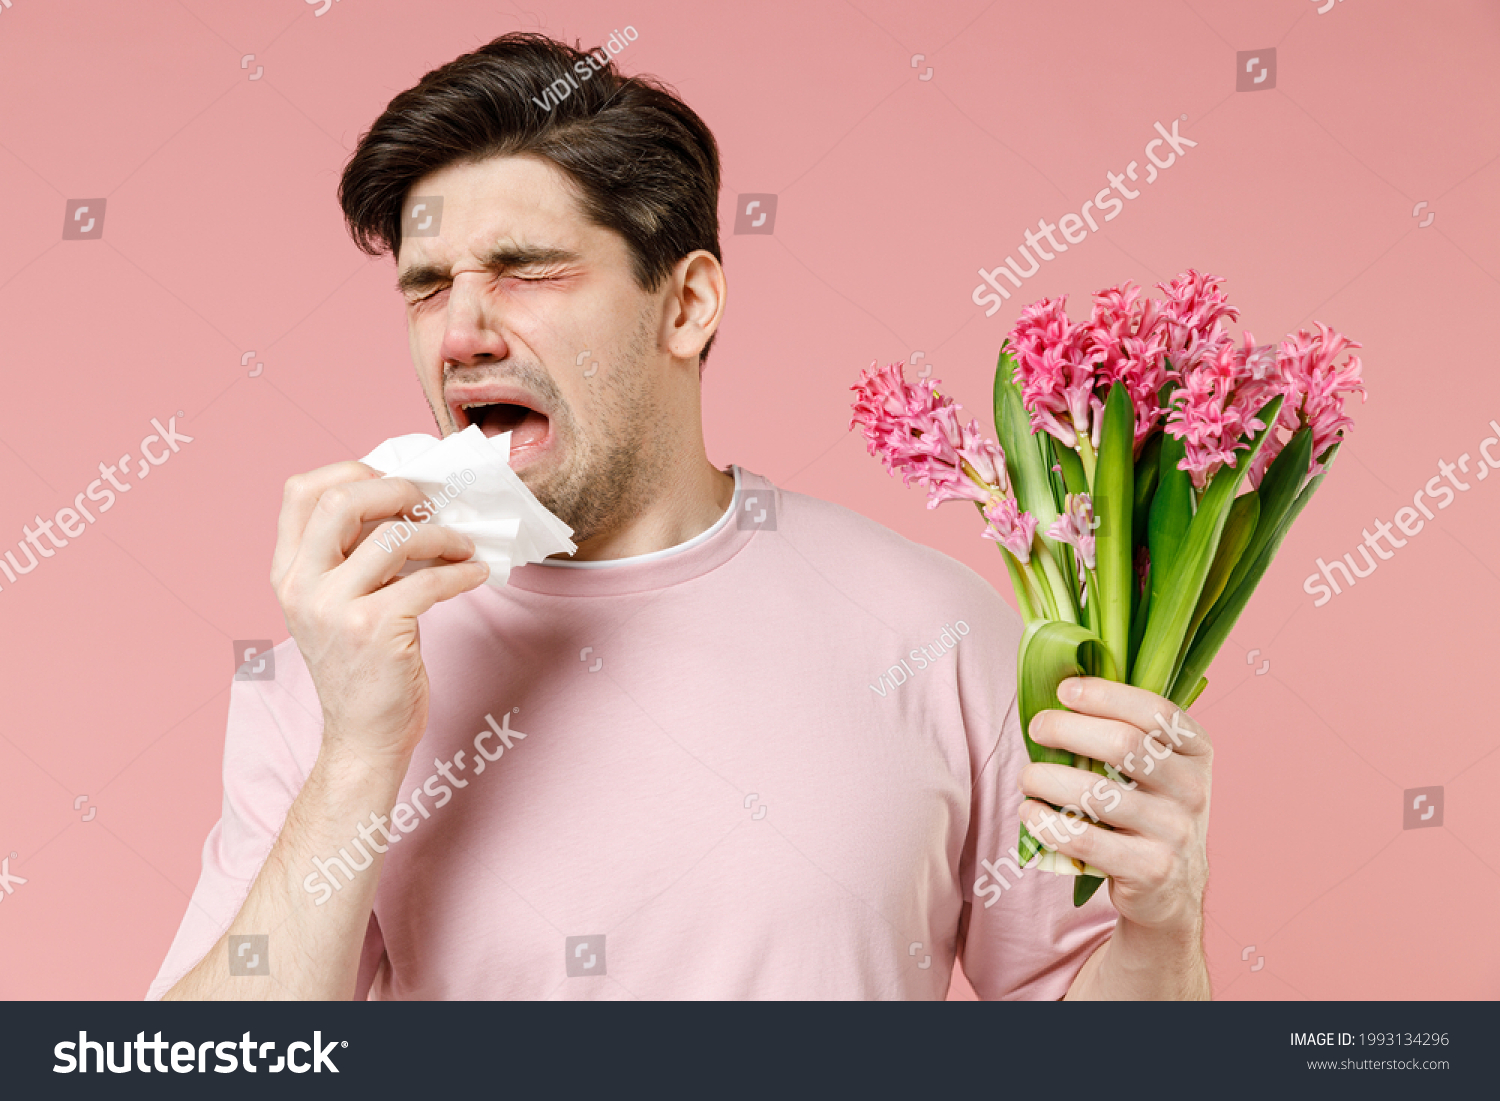 Sick allergic man has red eyes runny stuffy sore nose suffer from pollen allergy symptoms hay fever hold bloom flower plant napkin reaction on trigger isolated on pastel pink color background studio #1993134296